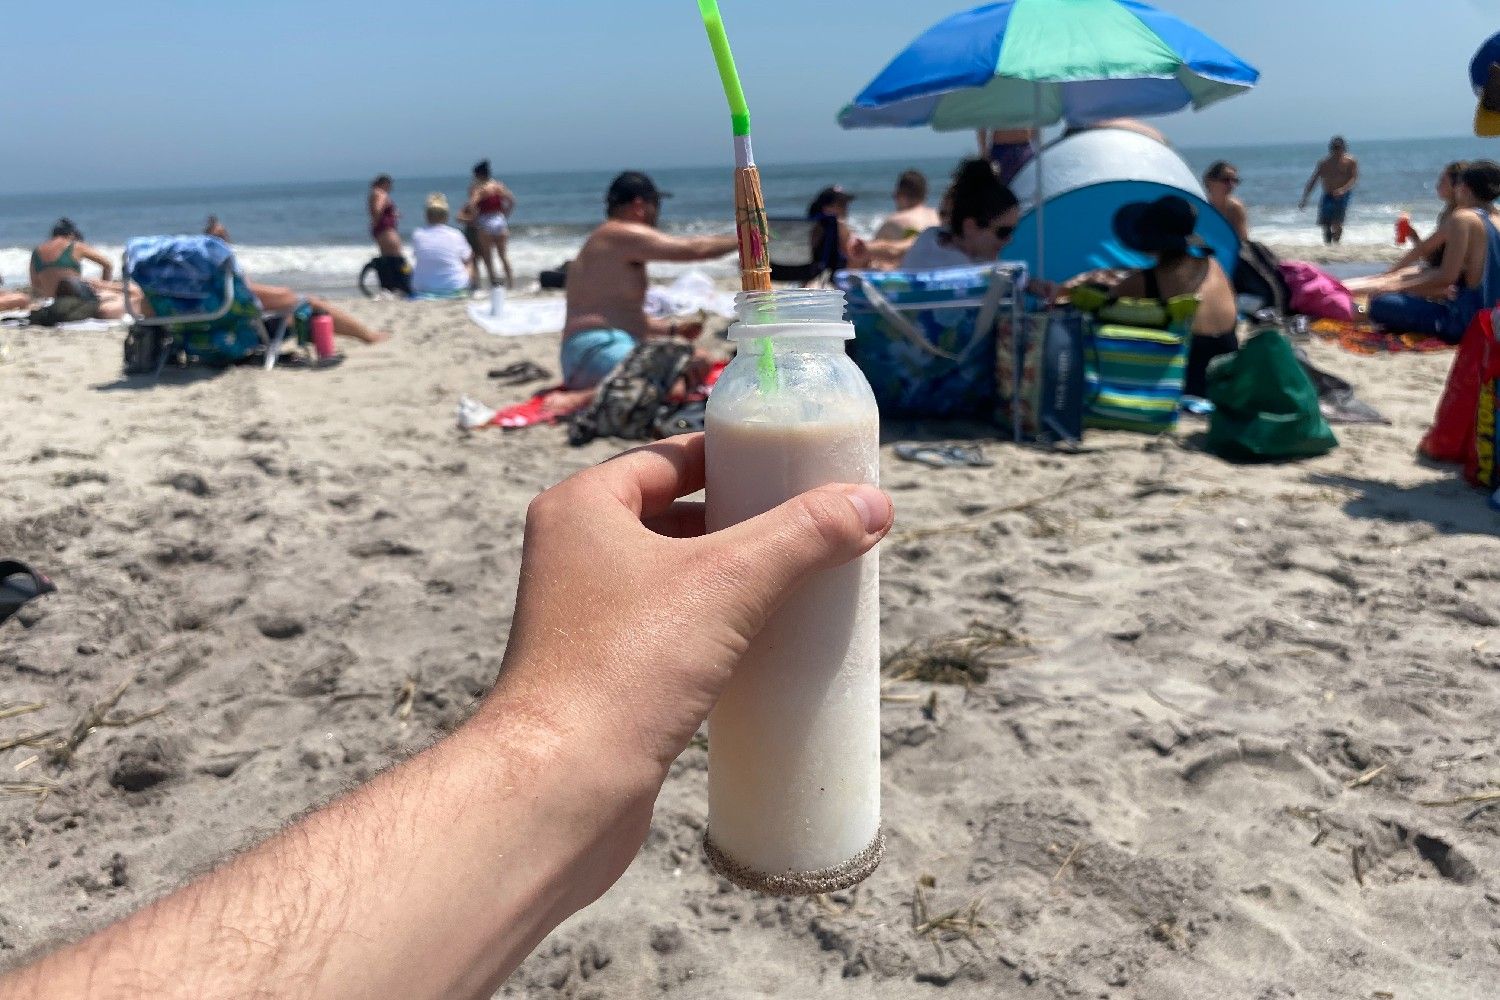 A person holding a nutcracker up with a view of the beach and ocean in the background.